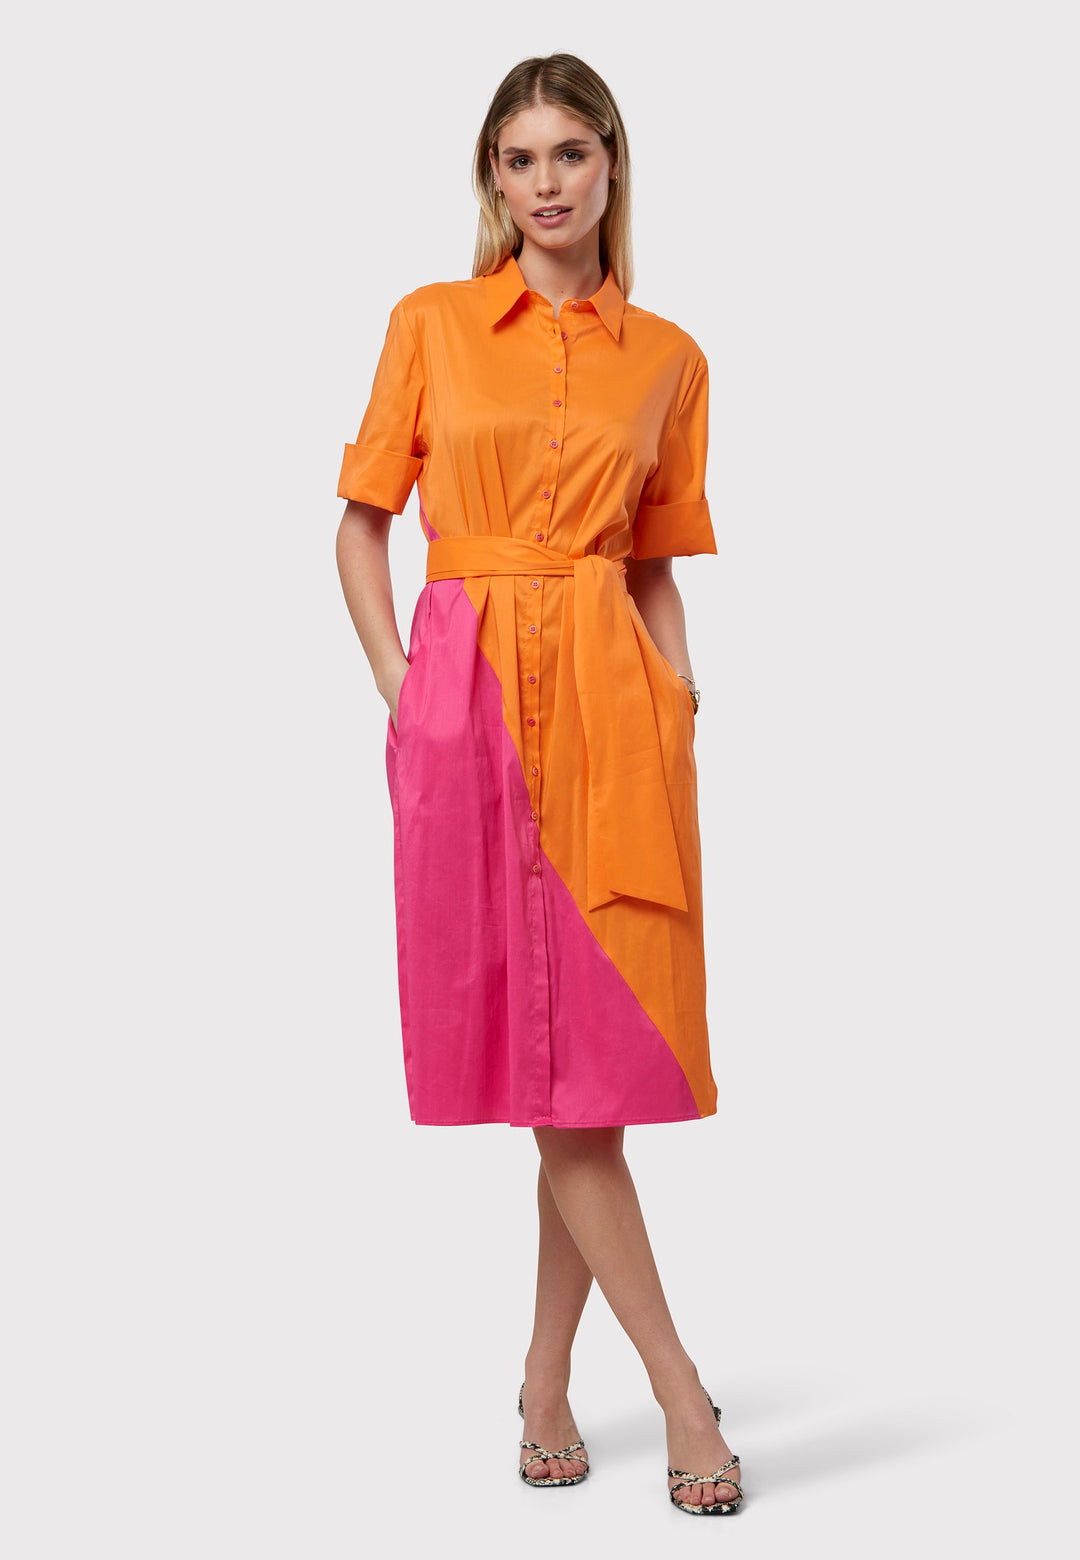 Introducing Bella, A bicoloured Shirt dress with a bold asymmetric panel, on both the front and back in vivid shades of orange and pink. Your go-to shirt dress. Crafted with a sleek edge, this dress boasts a detachable belt that cinches the waist. The relaxed silhouette drapes over the hips with practical side seam pockets.